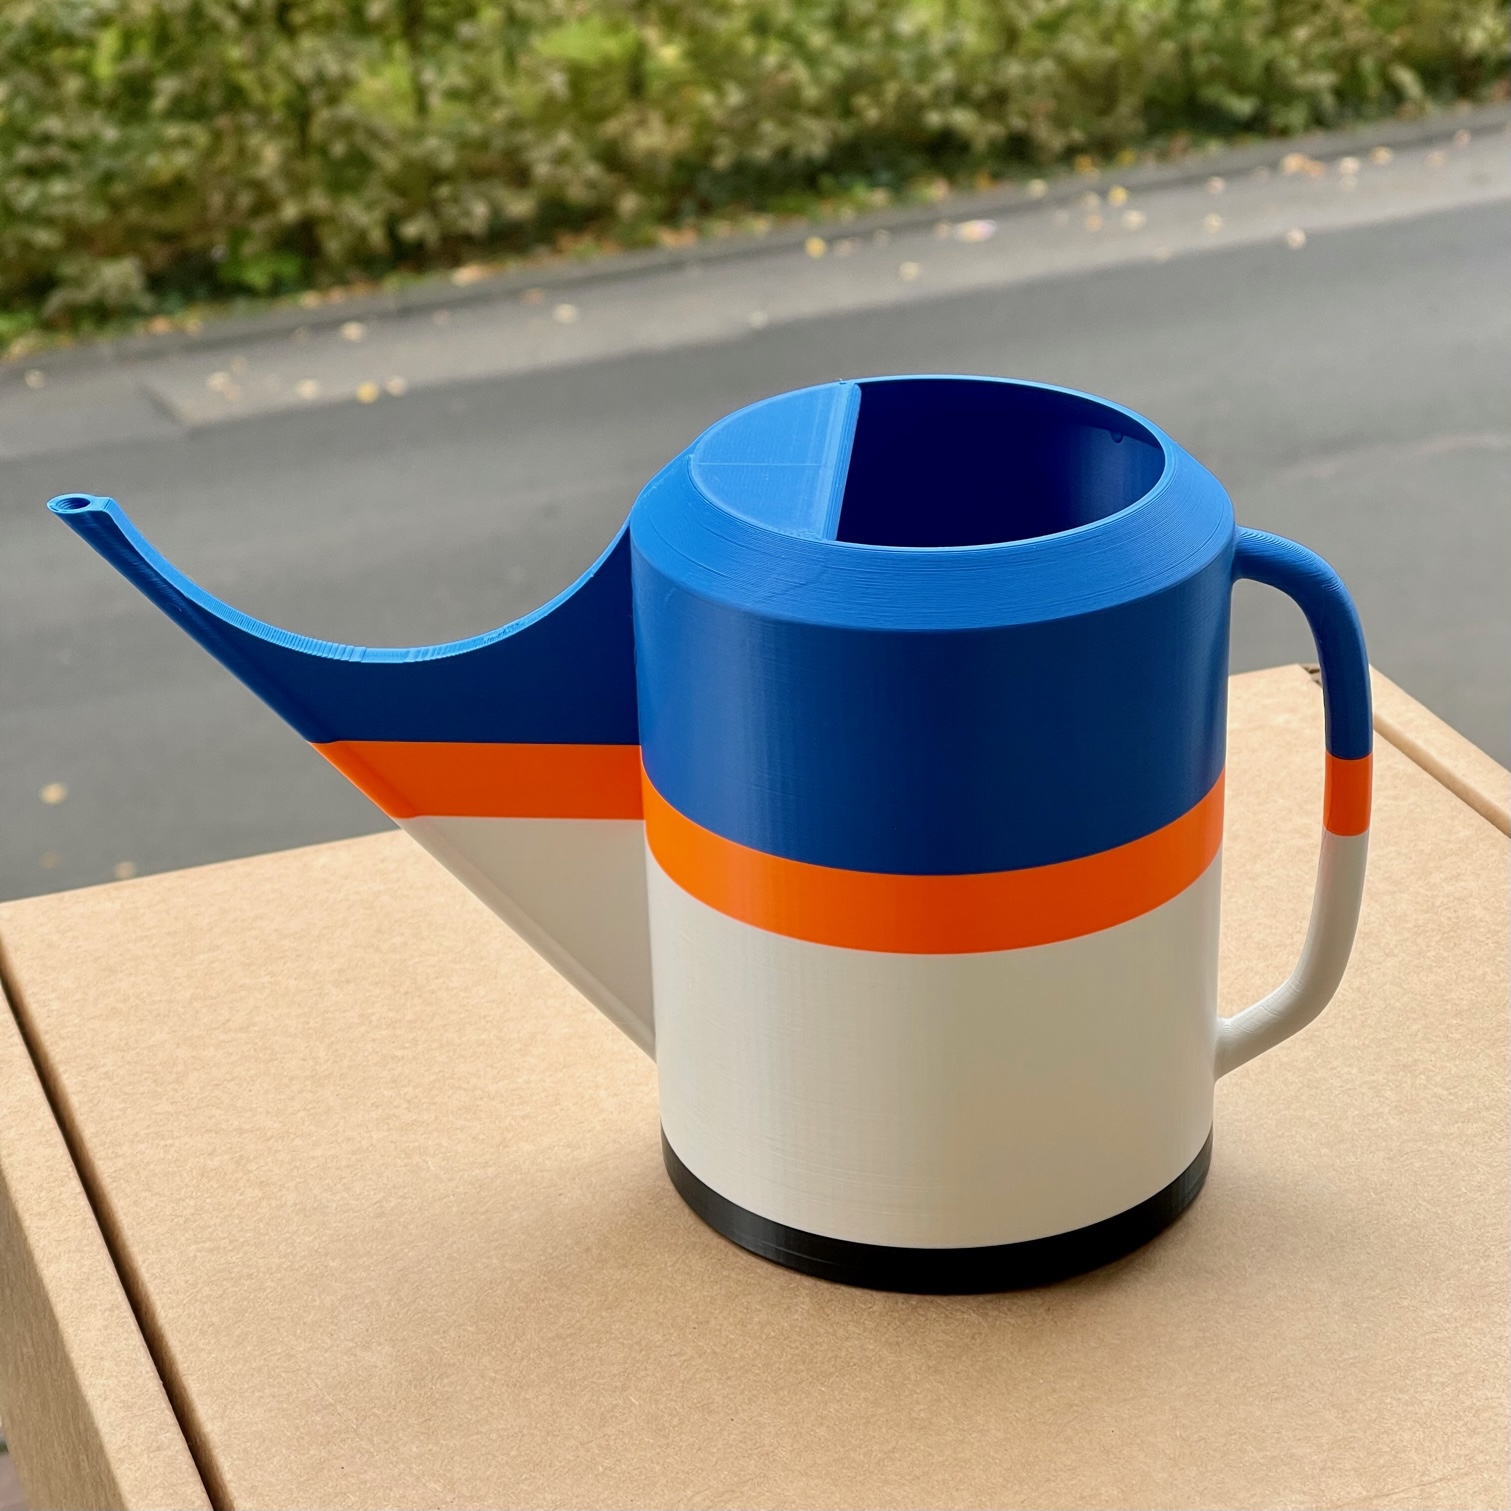 Watering can - approx. 1 liter capacity